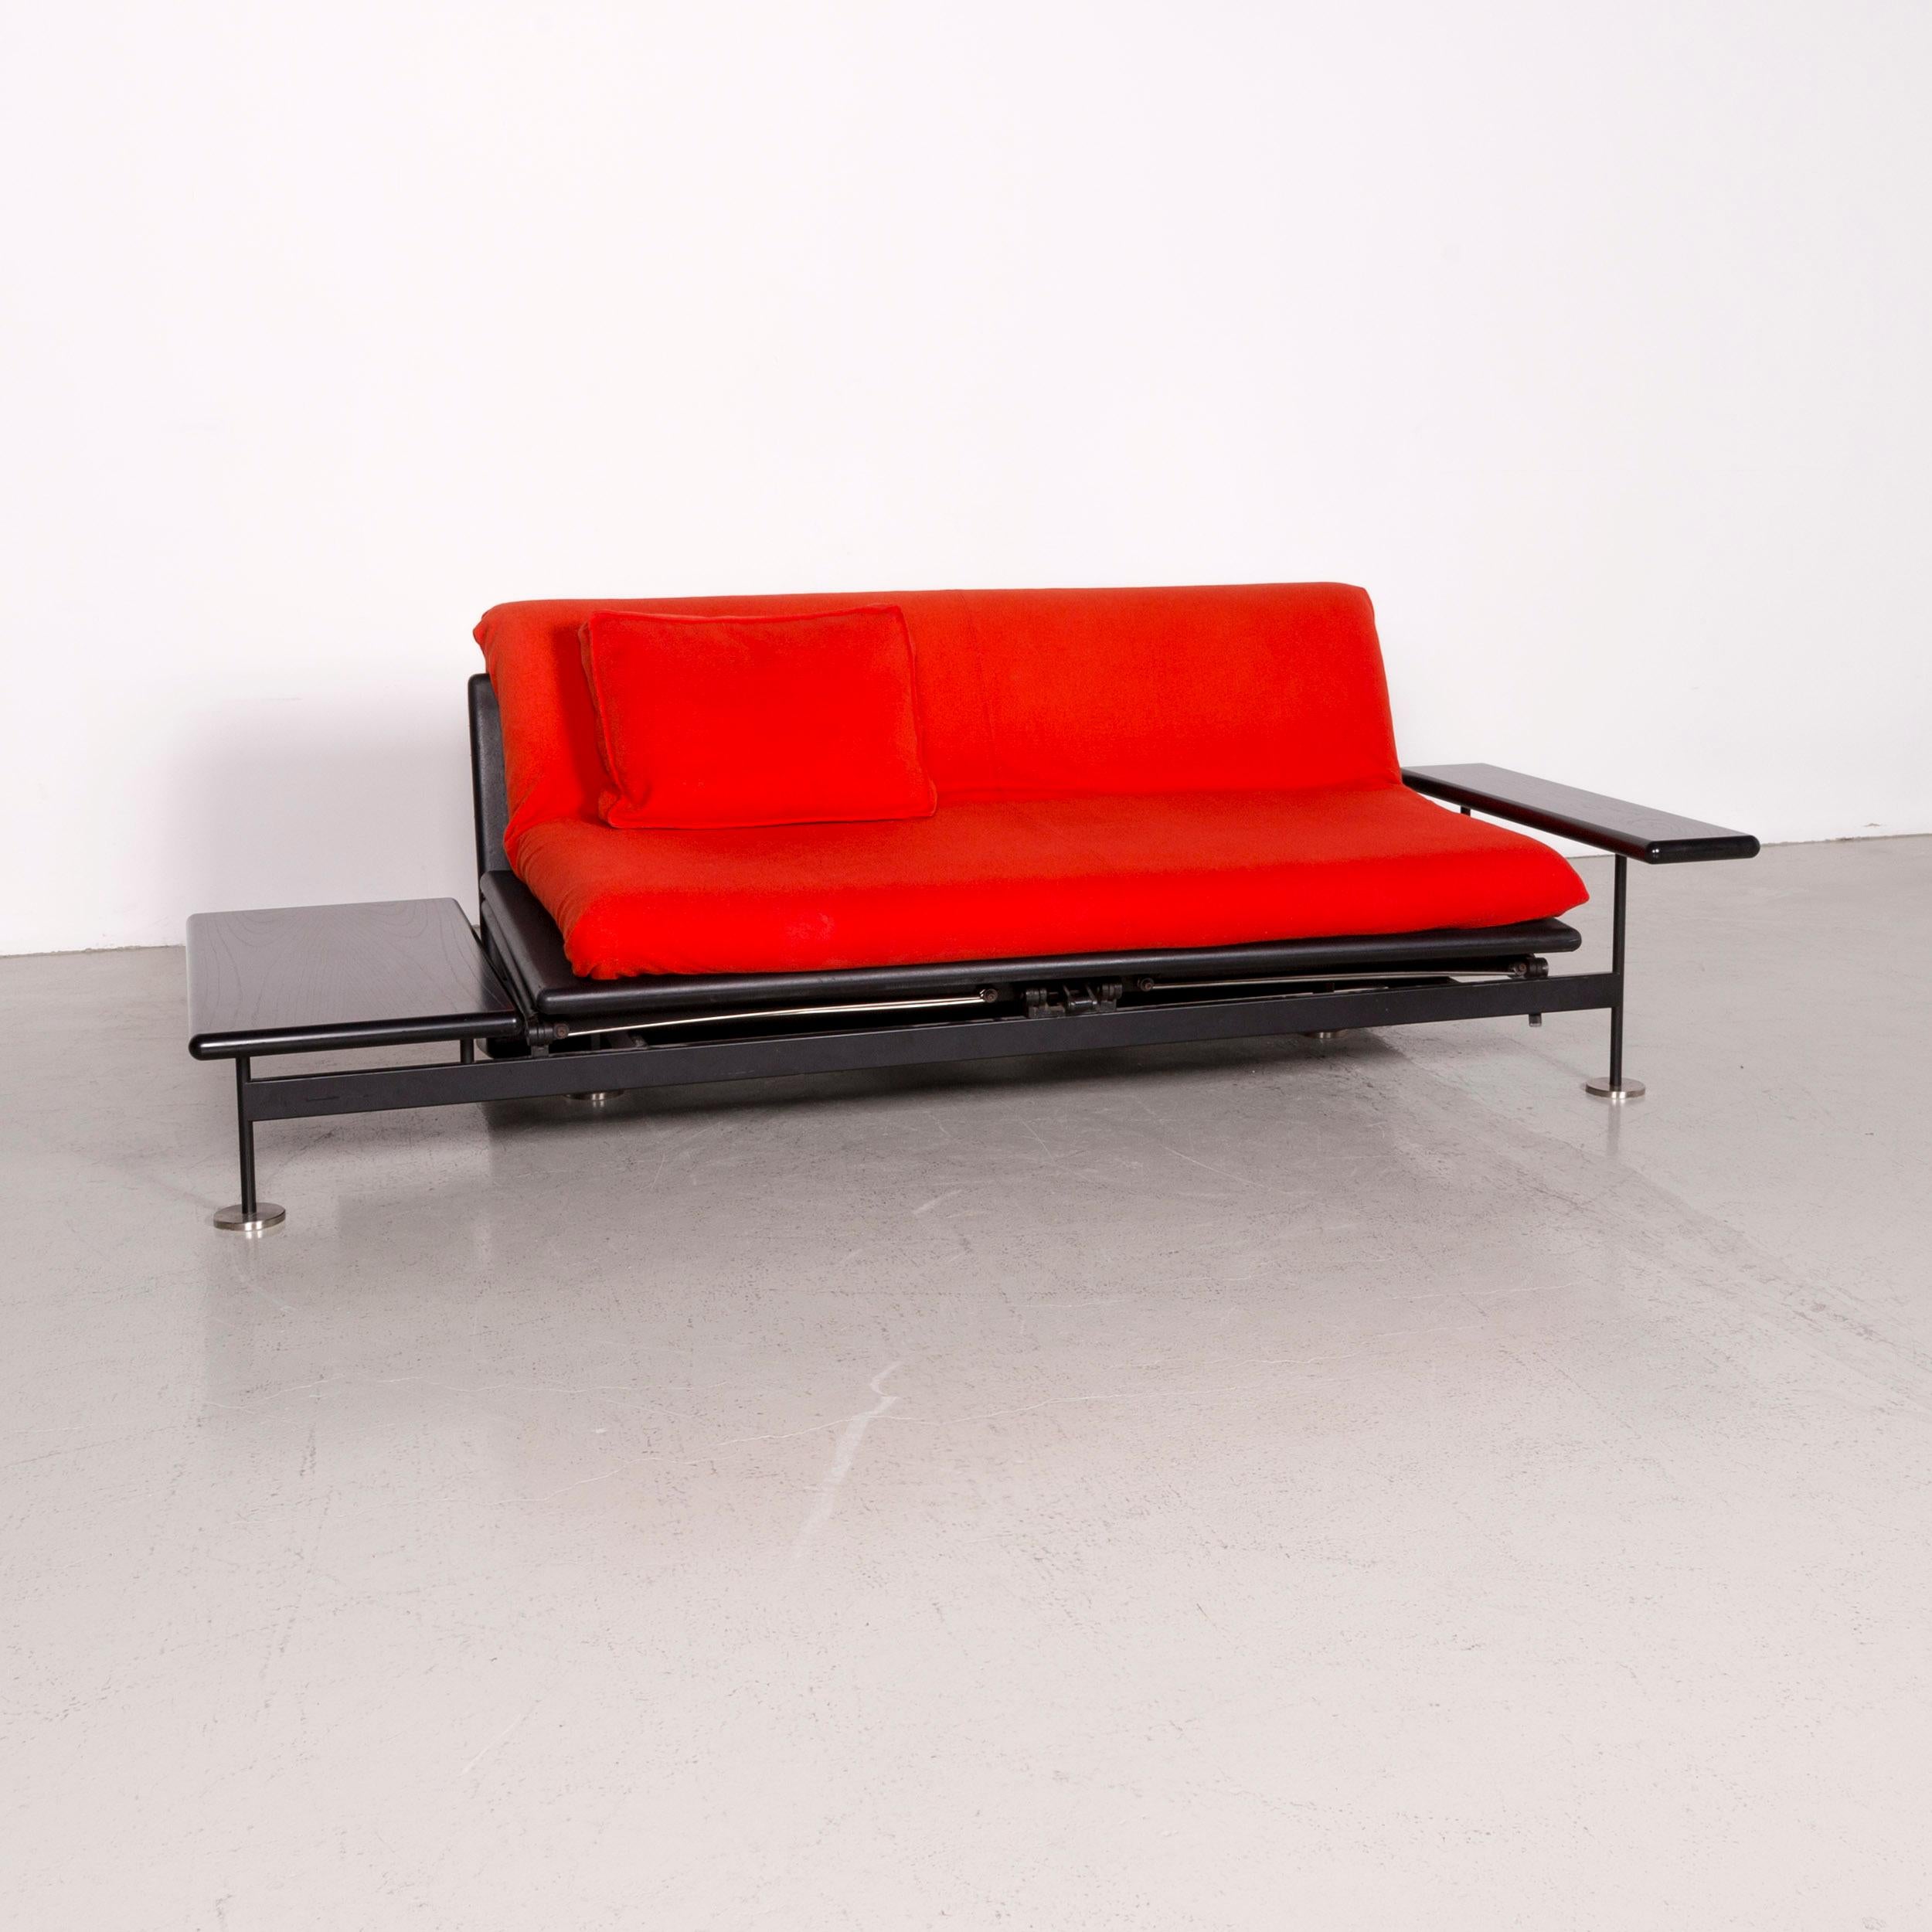 We bring to you an Arflex Pepper designer fabric sofa red by Guido Rosati two-seat sofa bed.

Product measurements in centimeters:

Depth 110
Width 245
Height 85
Seat-height 45
Rest-height 50
Seat-depth 60
Seat-width 170
Back-height